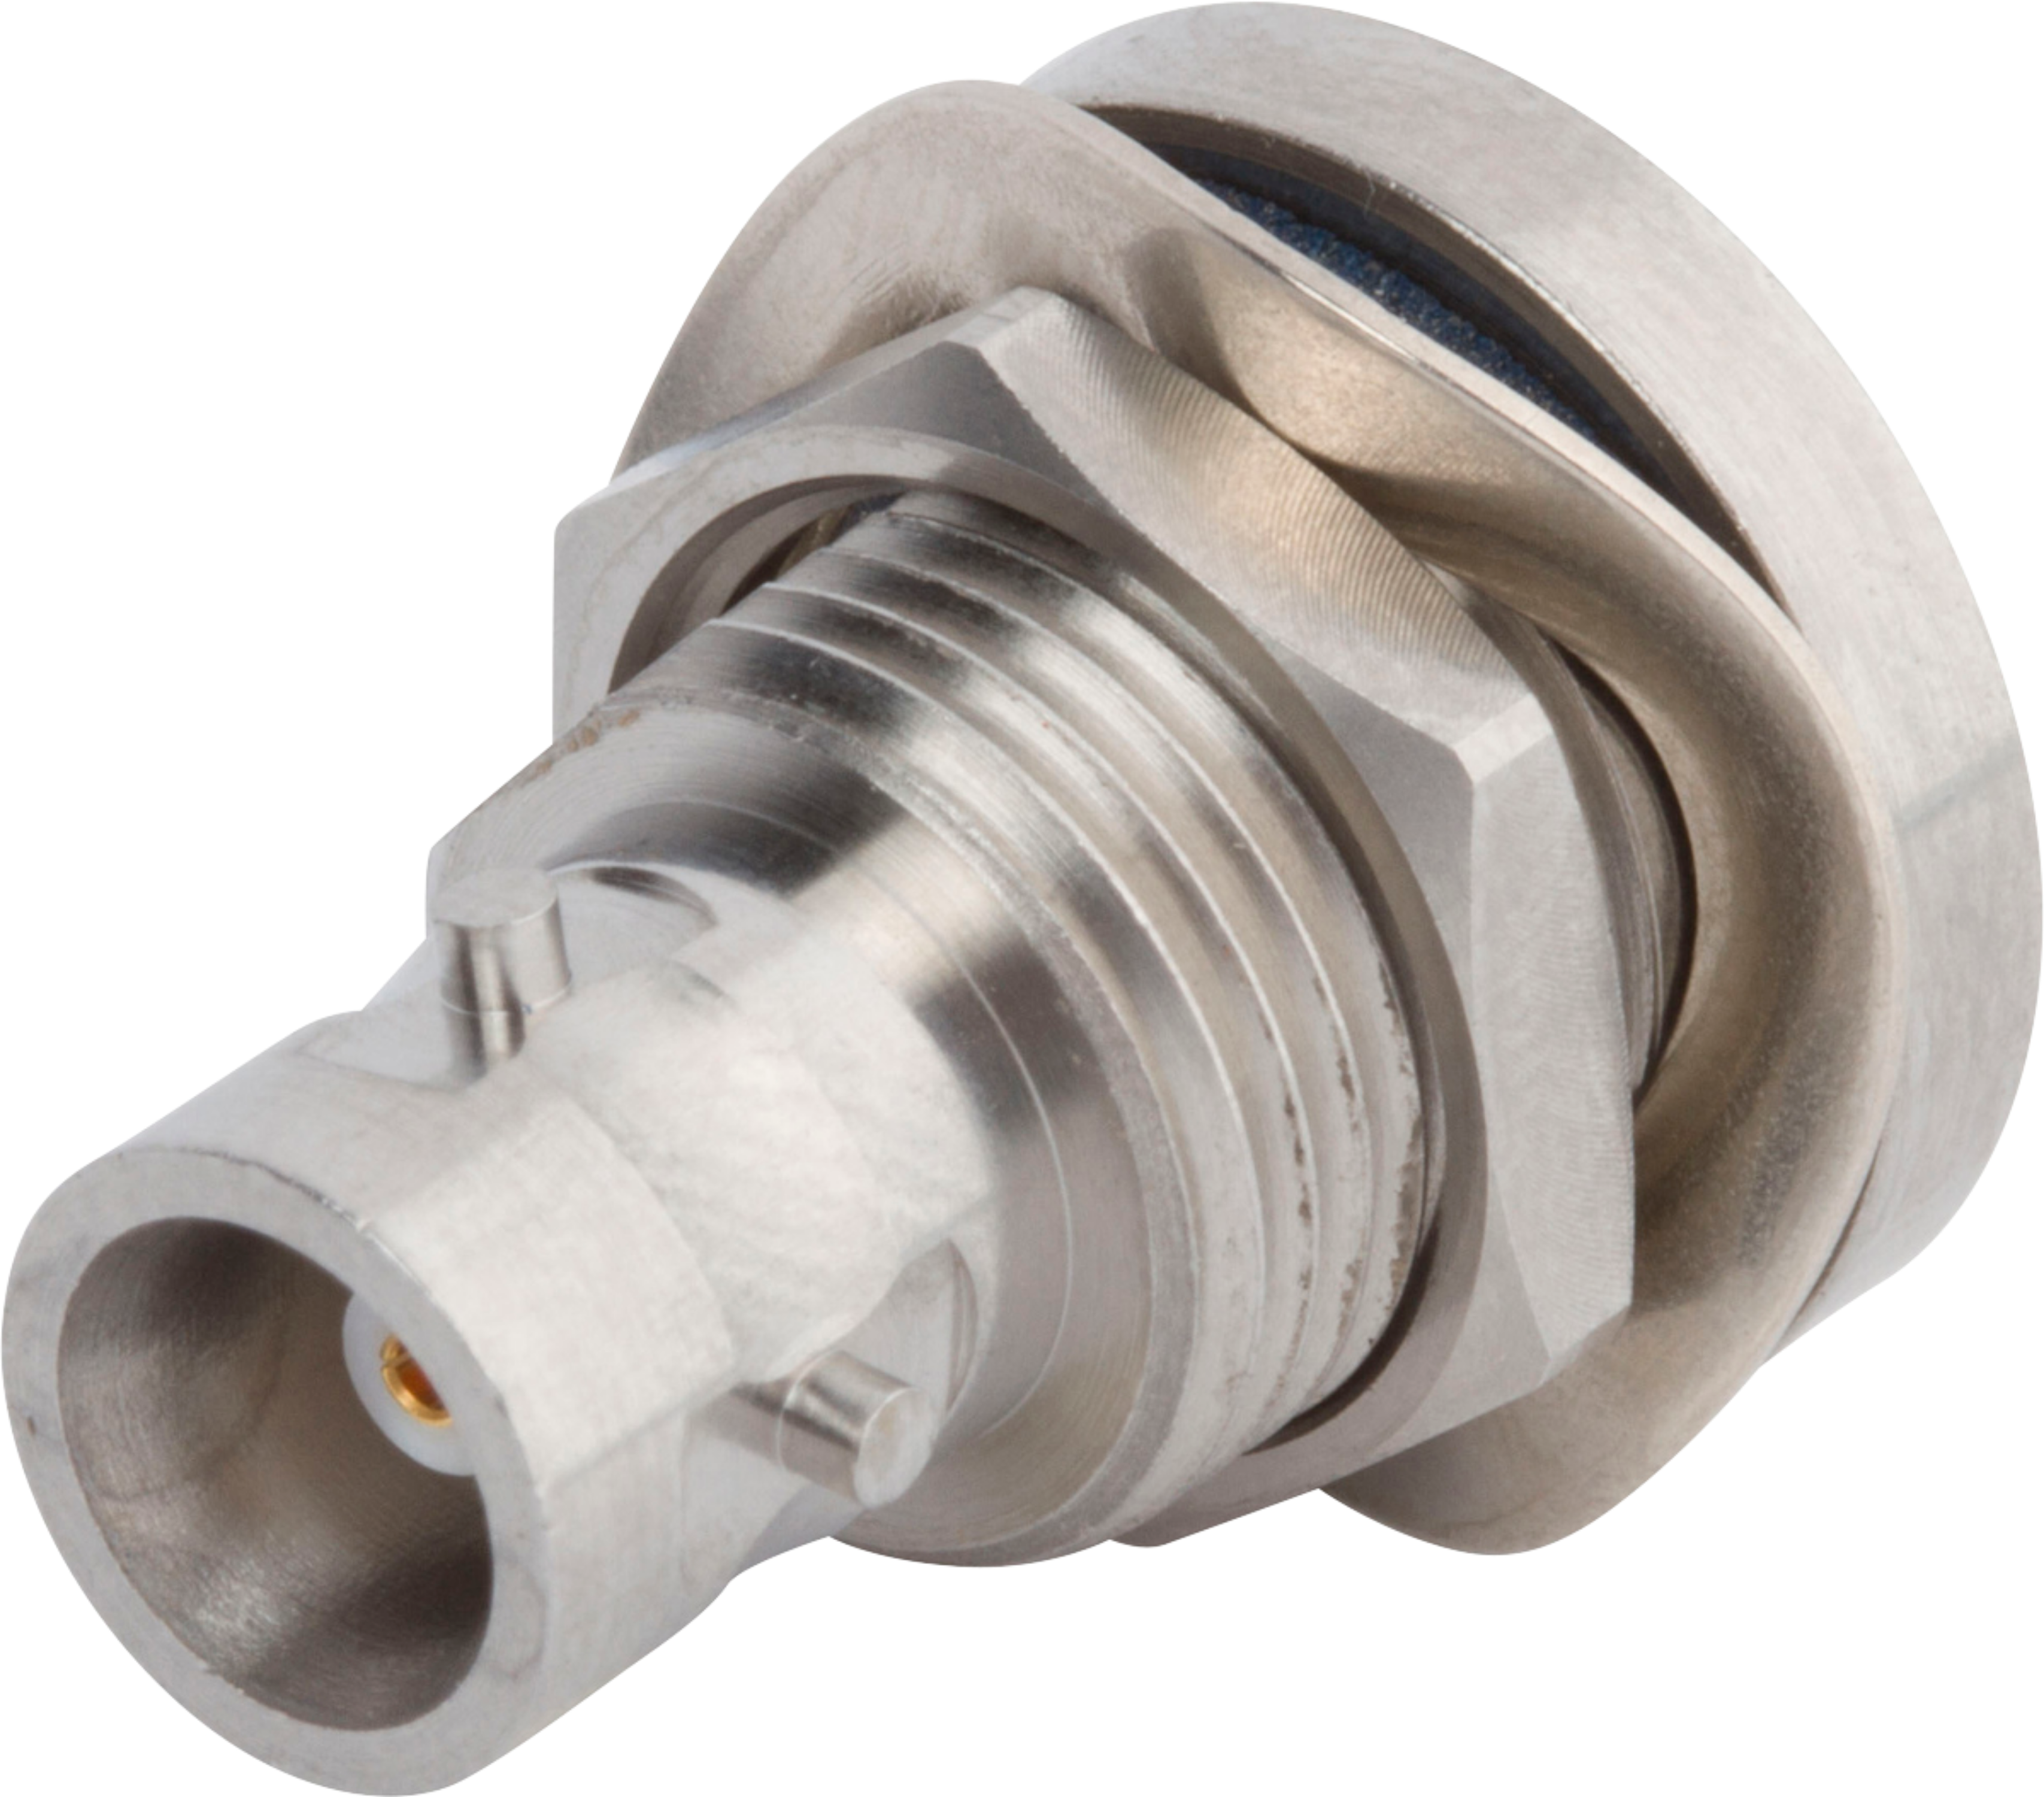 ZMA Female (120°) Connector for .085 Cable, SF8721-60112